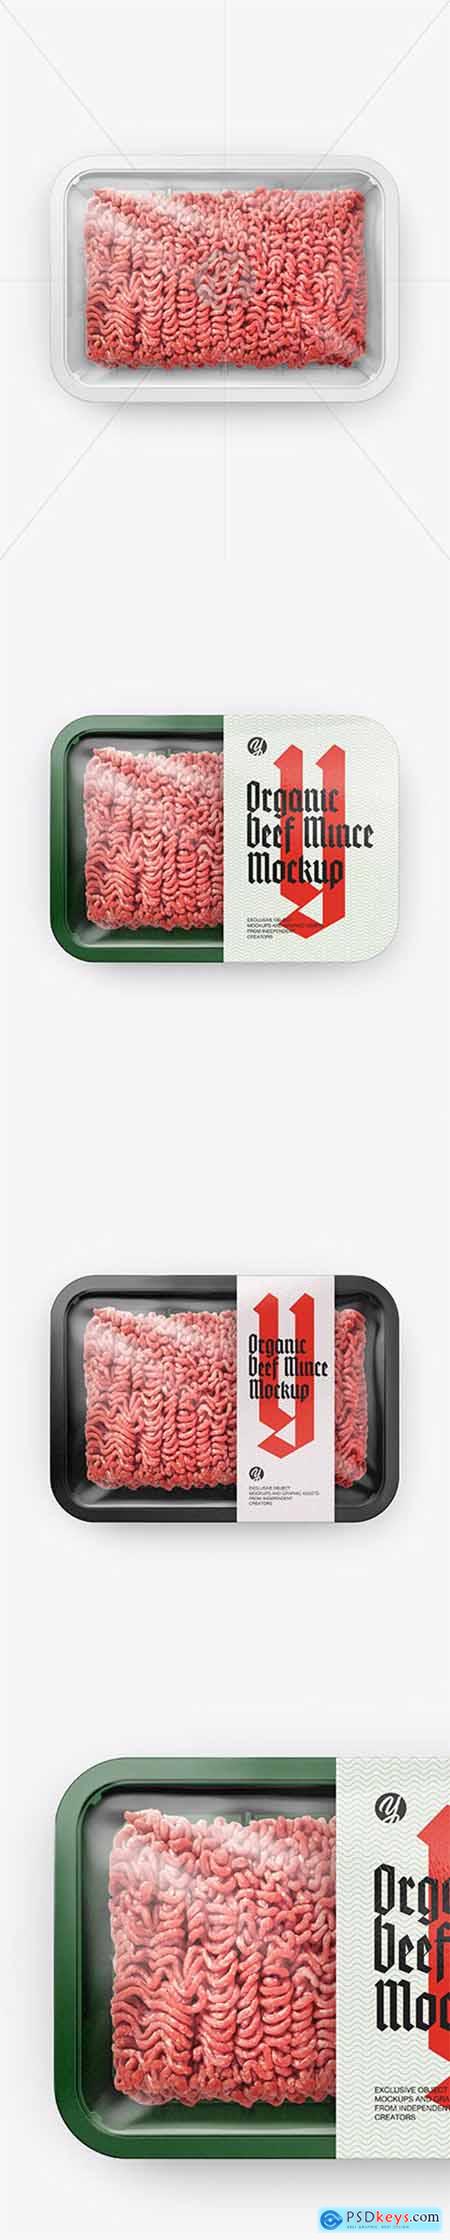 Plastic Tray With Beef Mince Mockup - Top View 29686